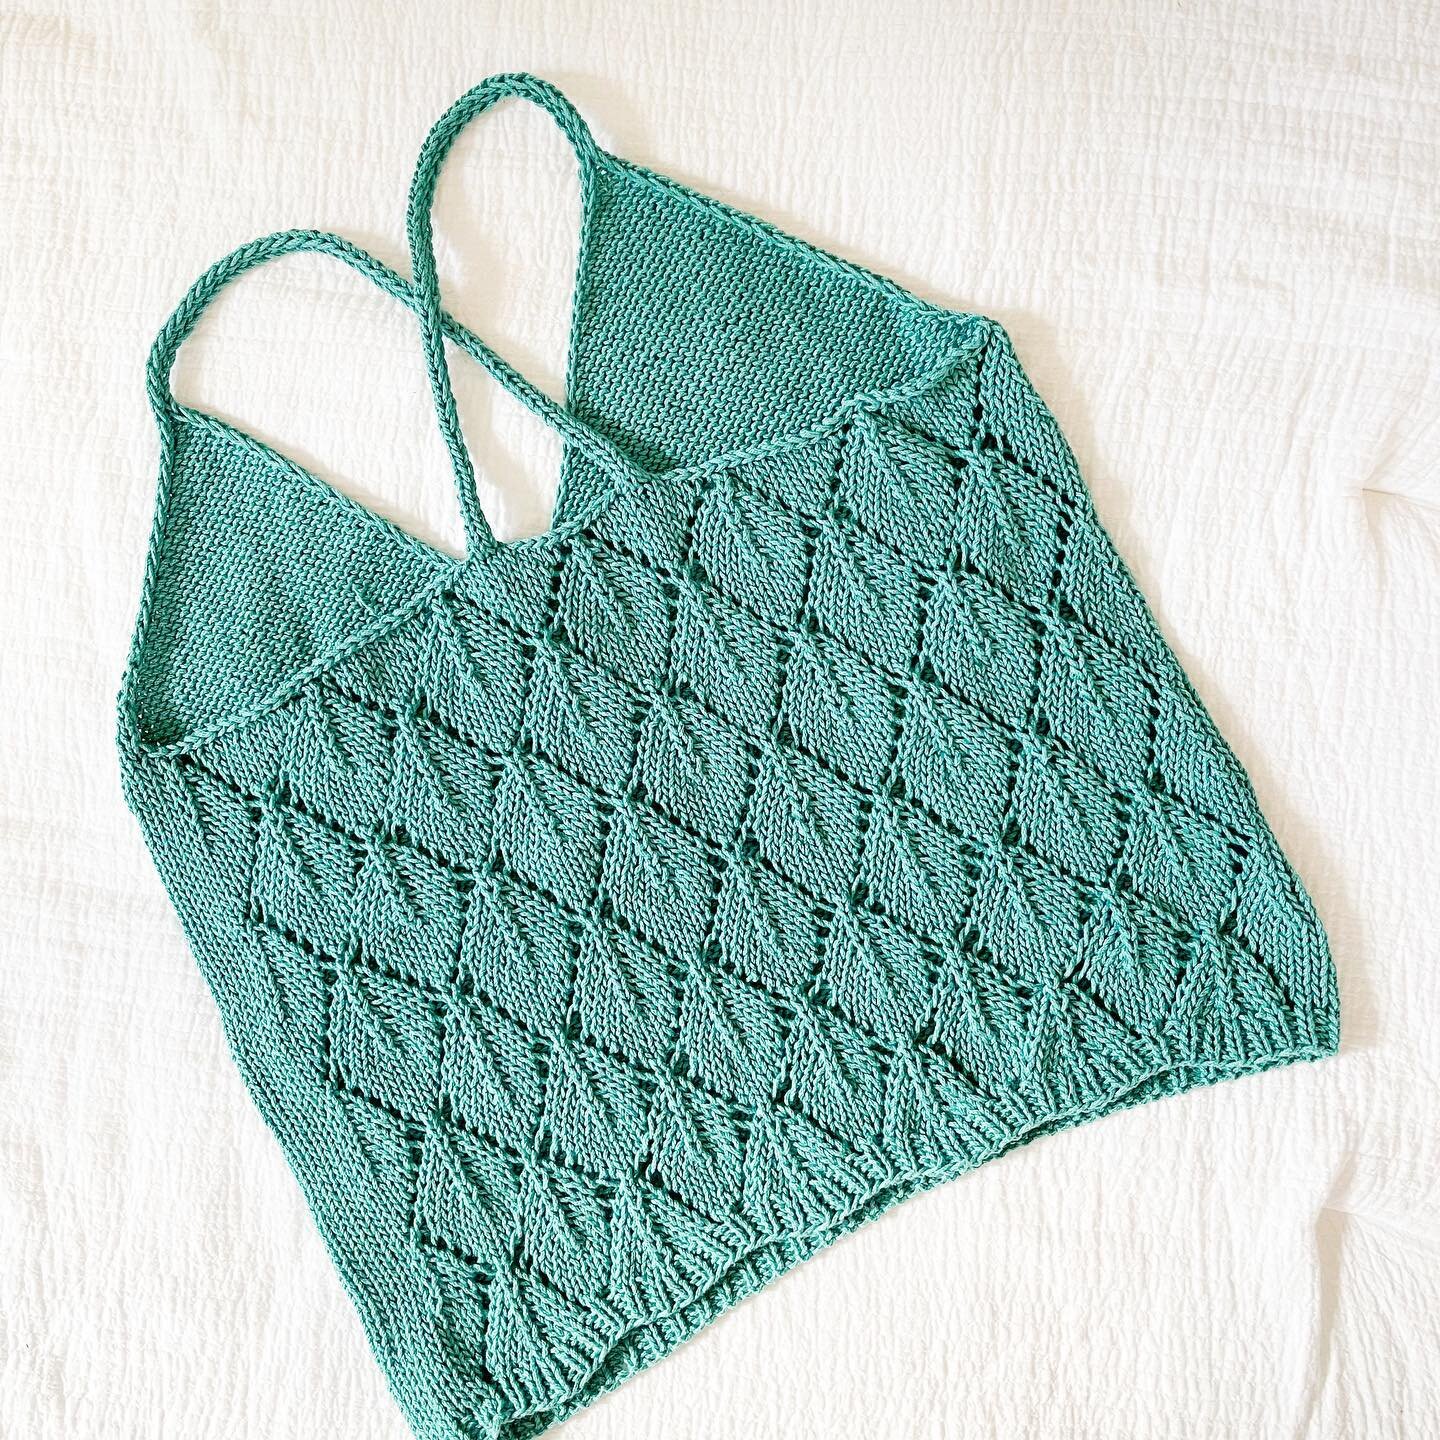 I made this Seasons Change Top last summer by @theknitstitch and it&rsquo;s still a summer fave&hellip;. 

It&rsquo;s knit in @lionbrandyarn 24/7 cotton
.
.⁣
.⁣
.⁣
.⁣
#knittersofig #knitknitknit #makersgonnamake #igknitter #handknit #knittingaddict #